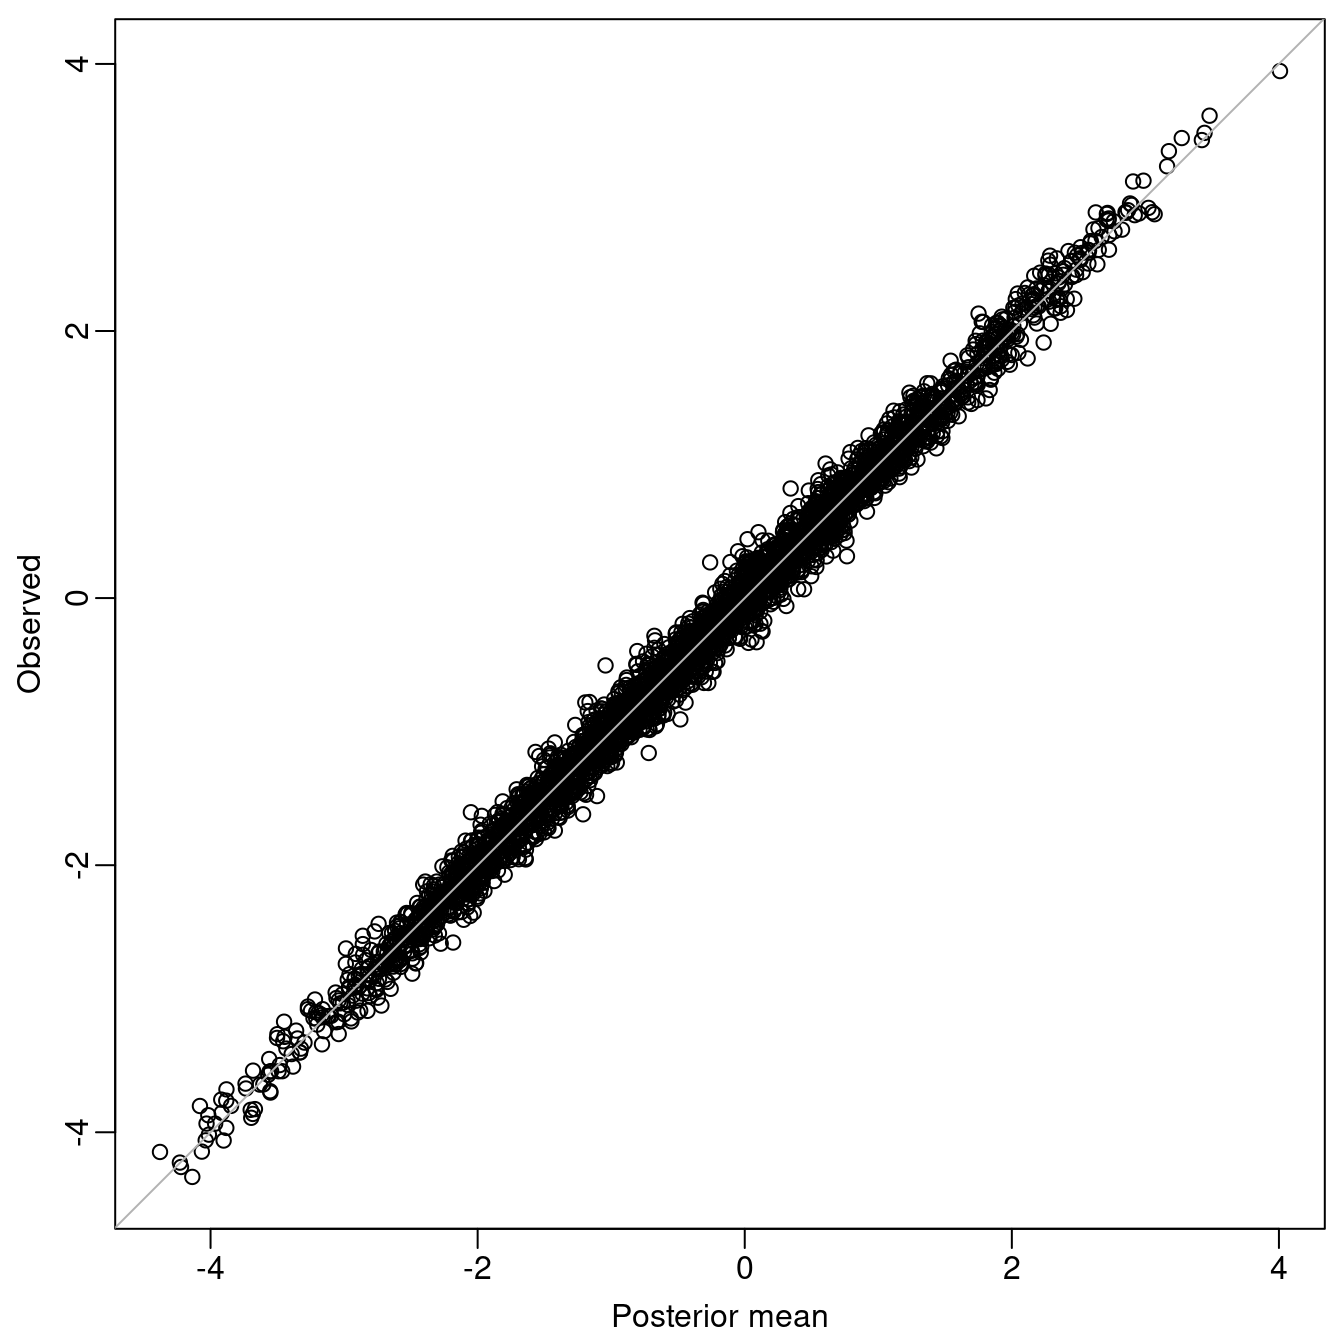 Validation: Observed values versus posterior means from the fitted model.